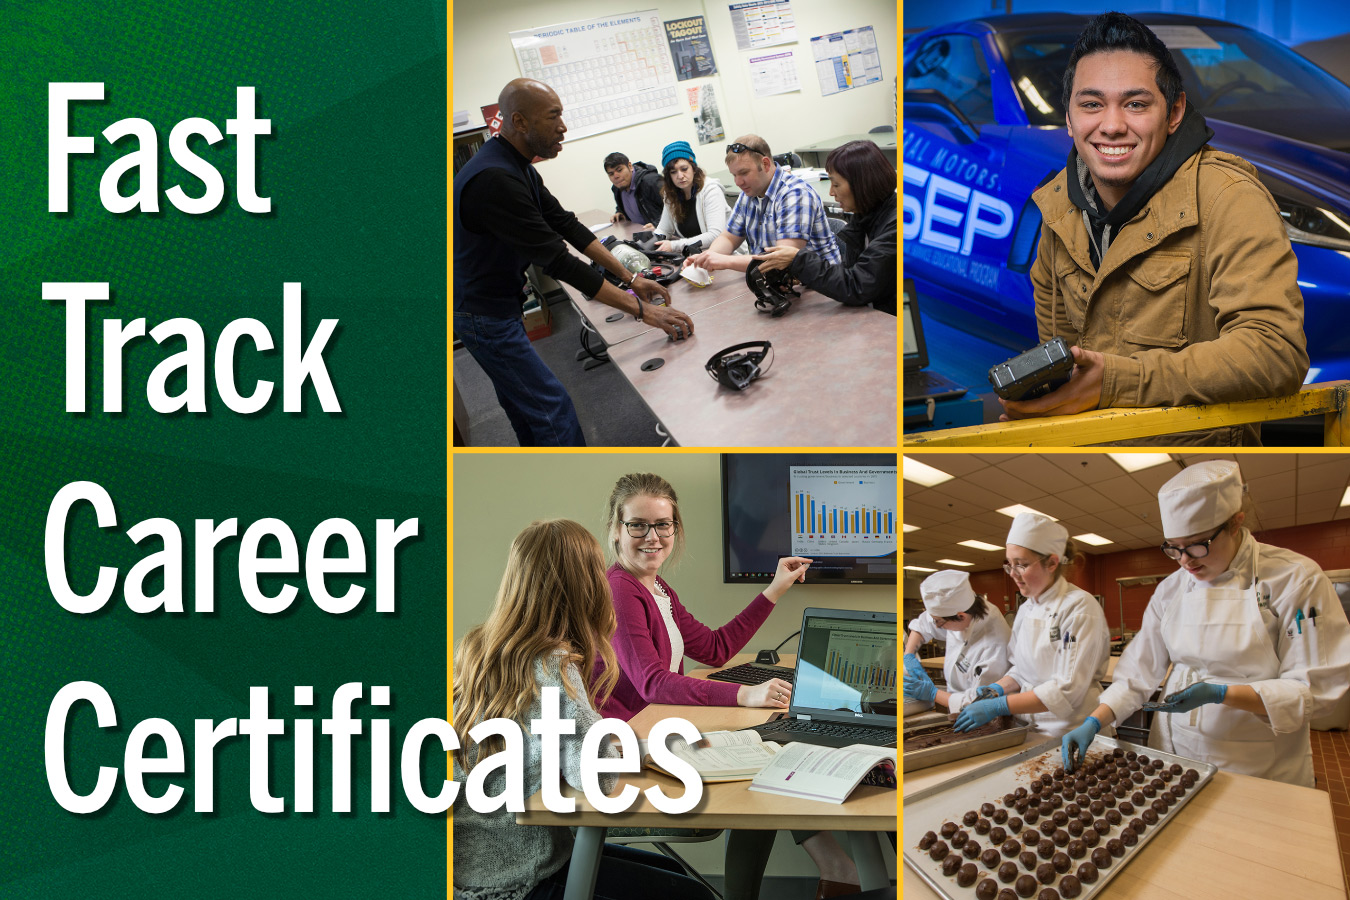 Fast Track Career Certificates from UAA